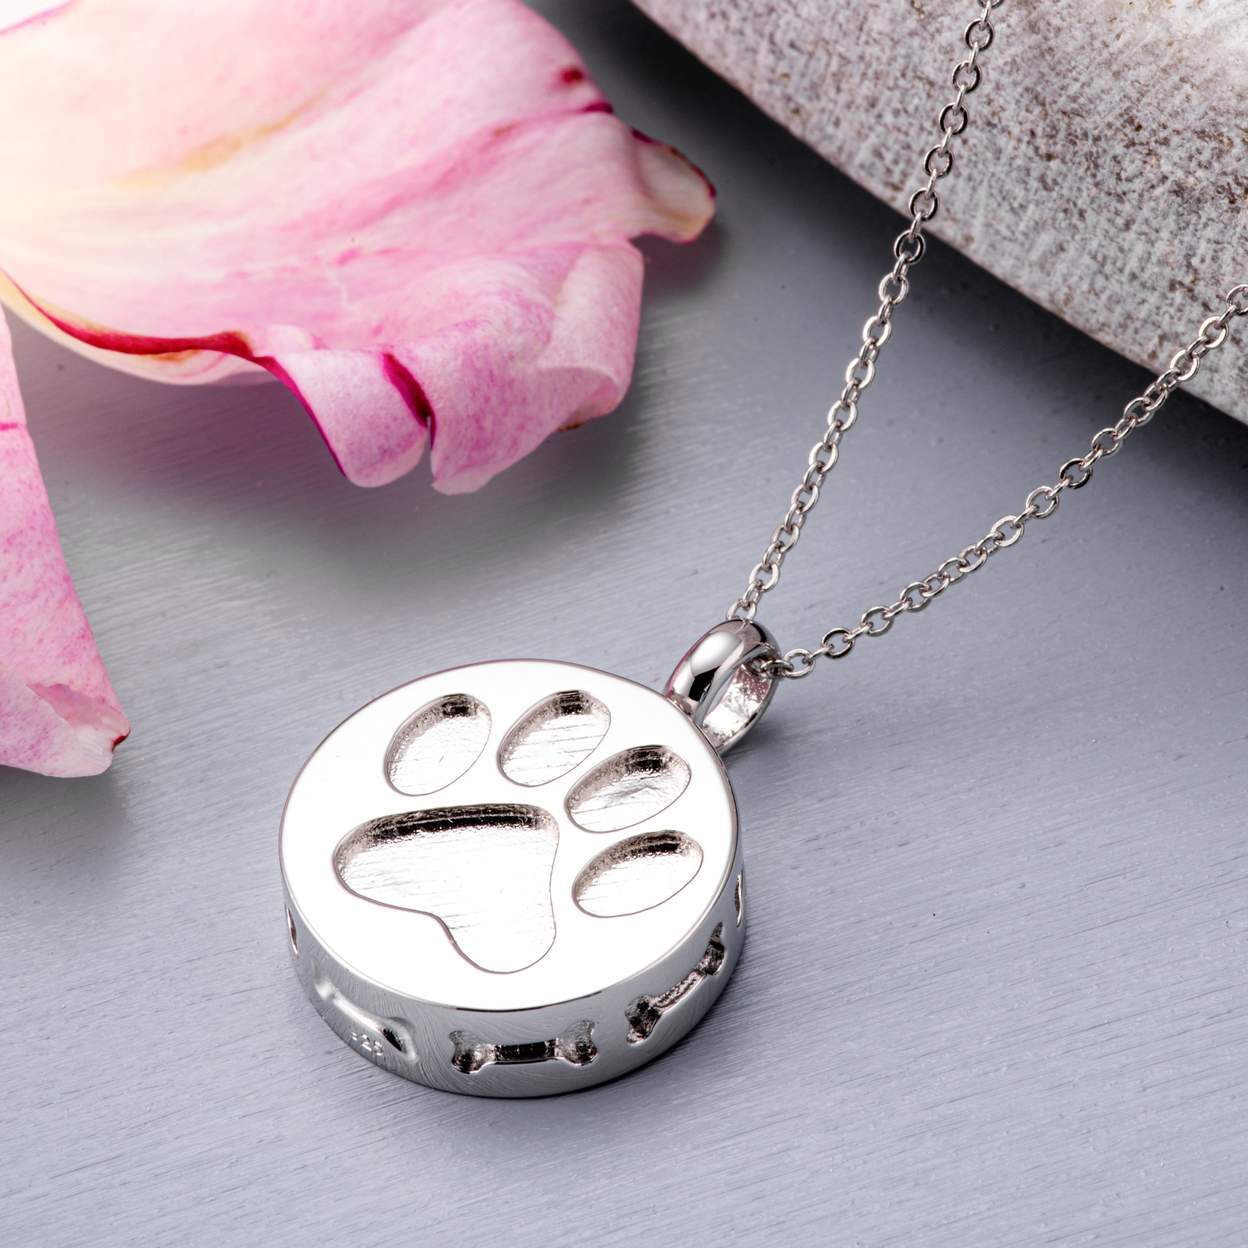 Forget Me Not Flower Urn Necklace for Ashes | Cremation Jewelry | Handmade  Urn Jewelry for Ashes | Keepsake Gift for Mom